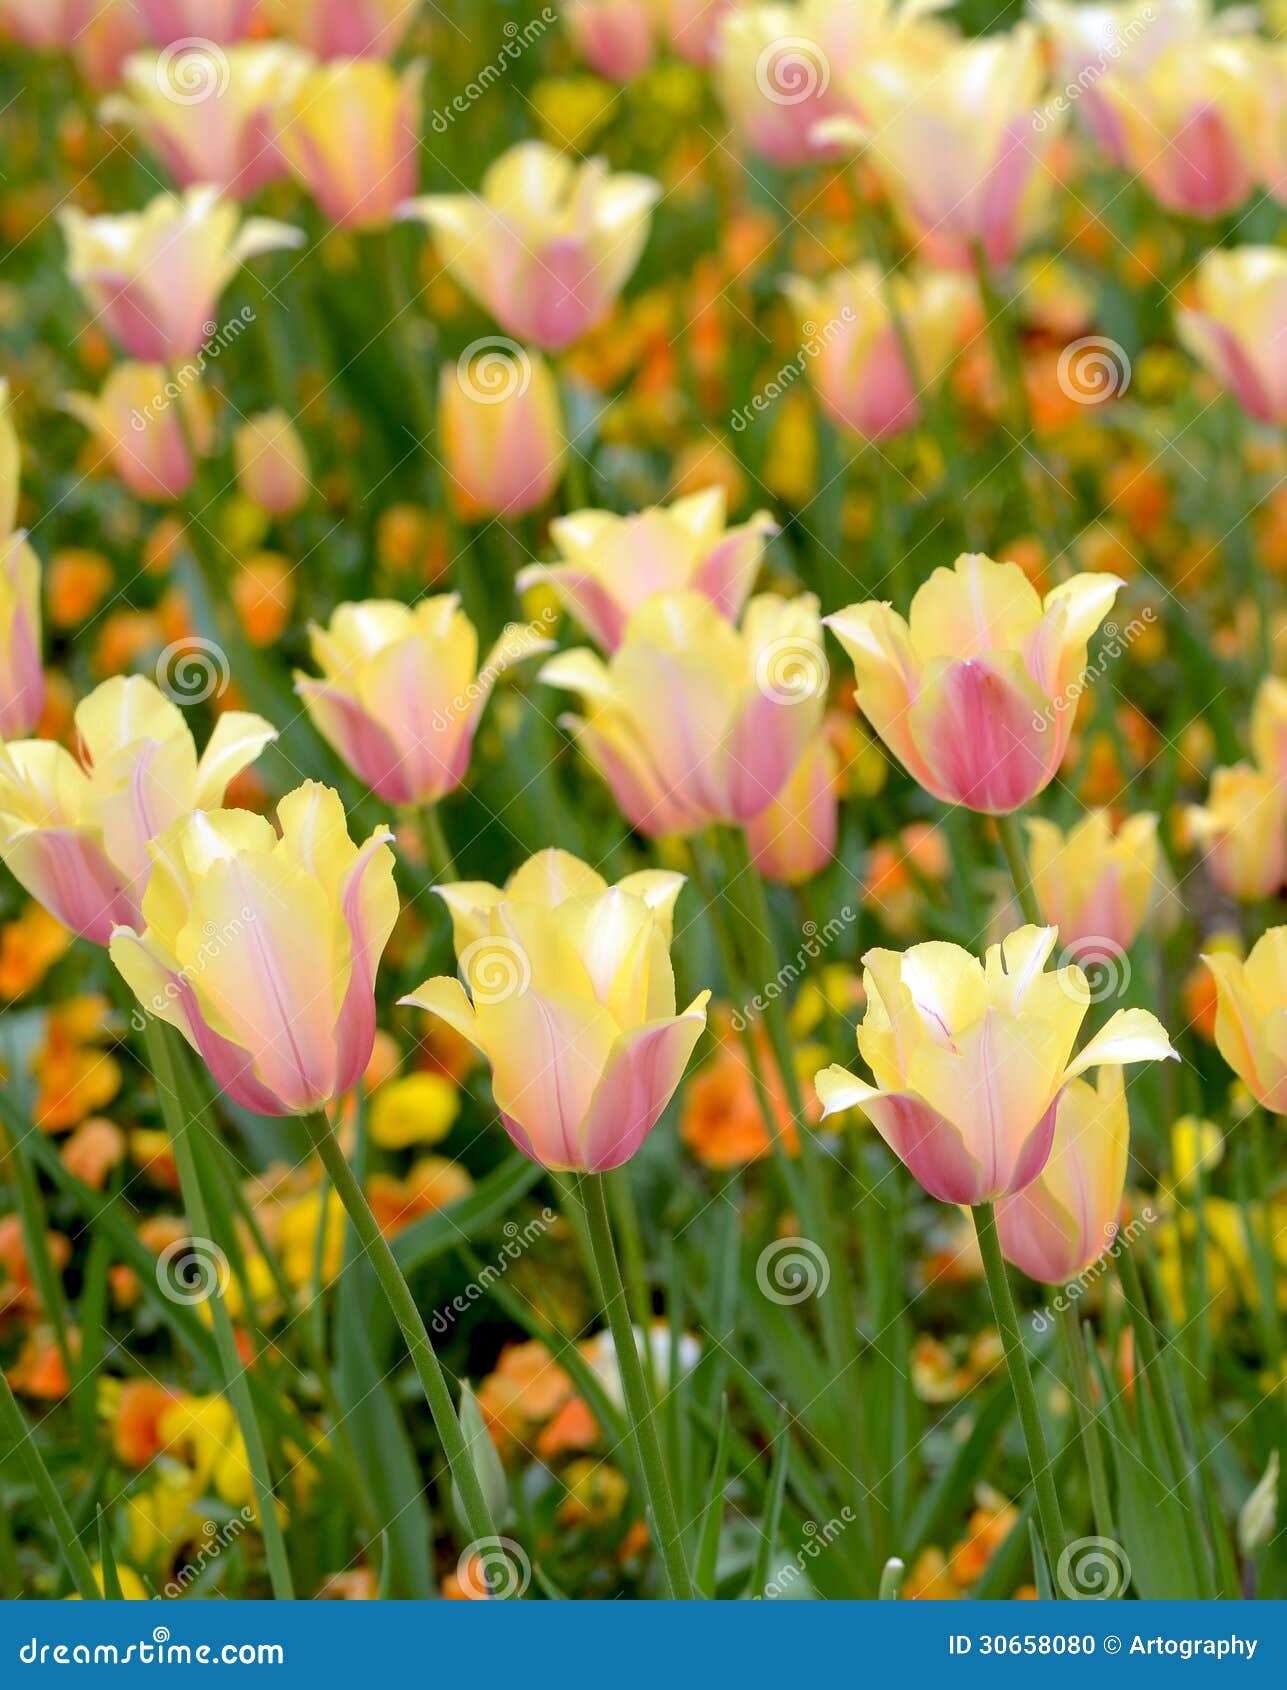 11 Tulip Blushing Lady Photos Free Royalty Free Stock Photos From Dreamstime